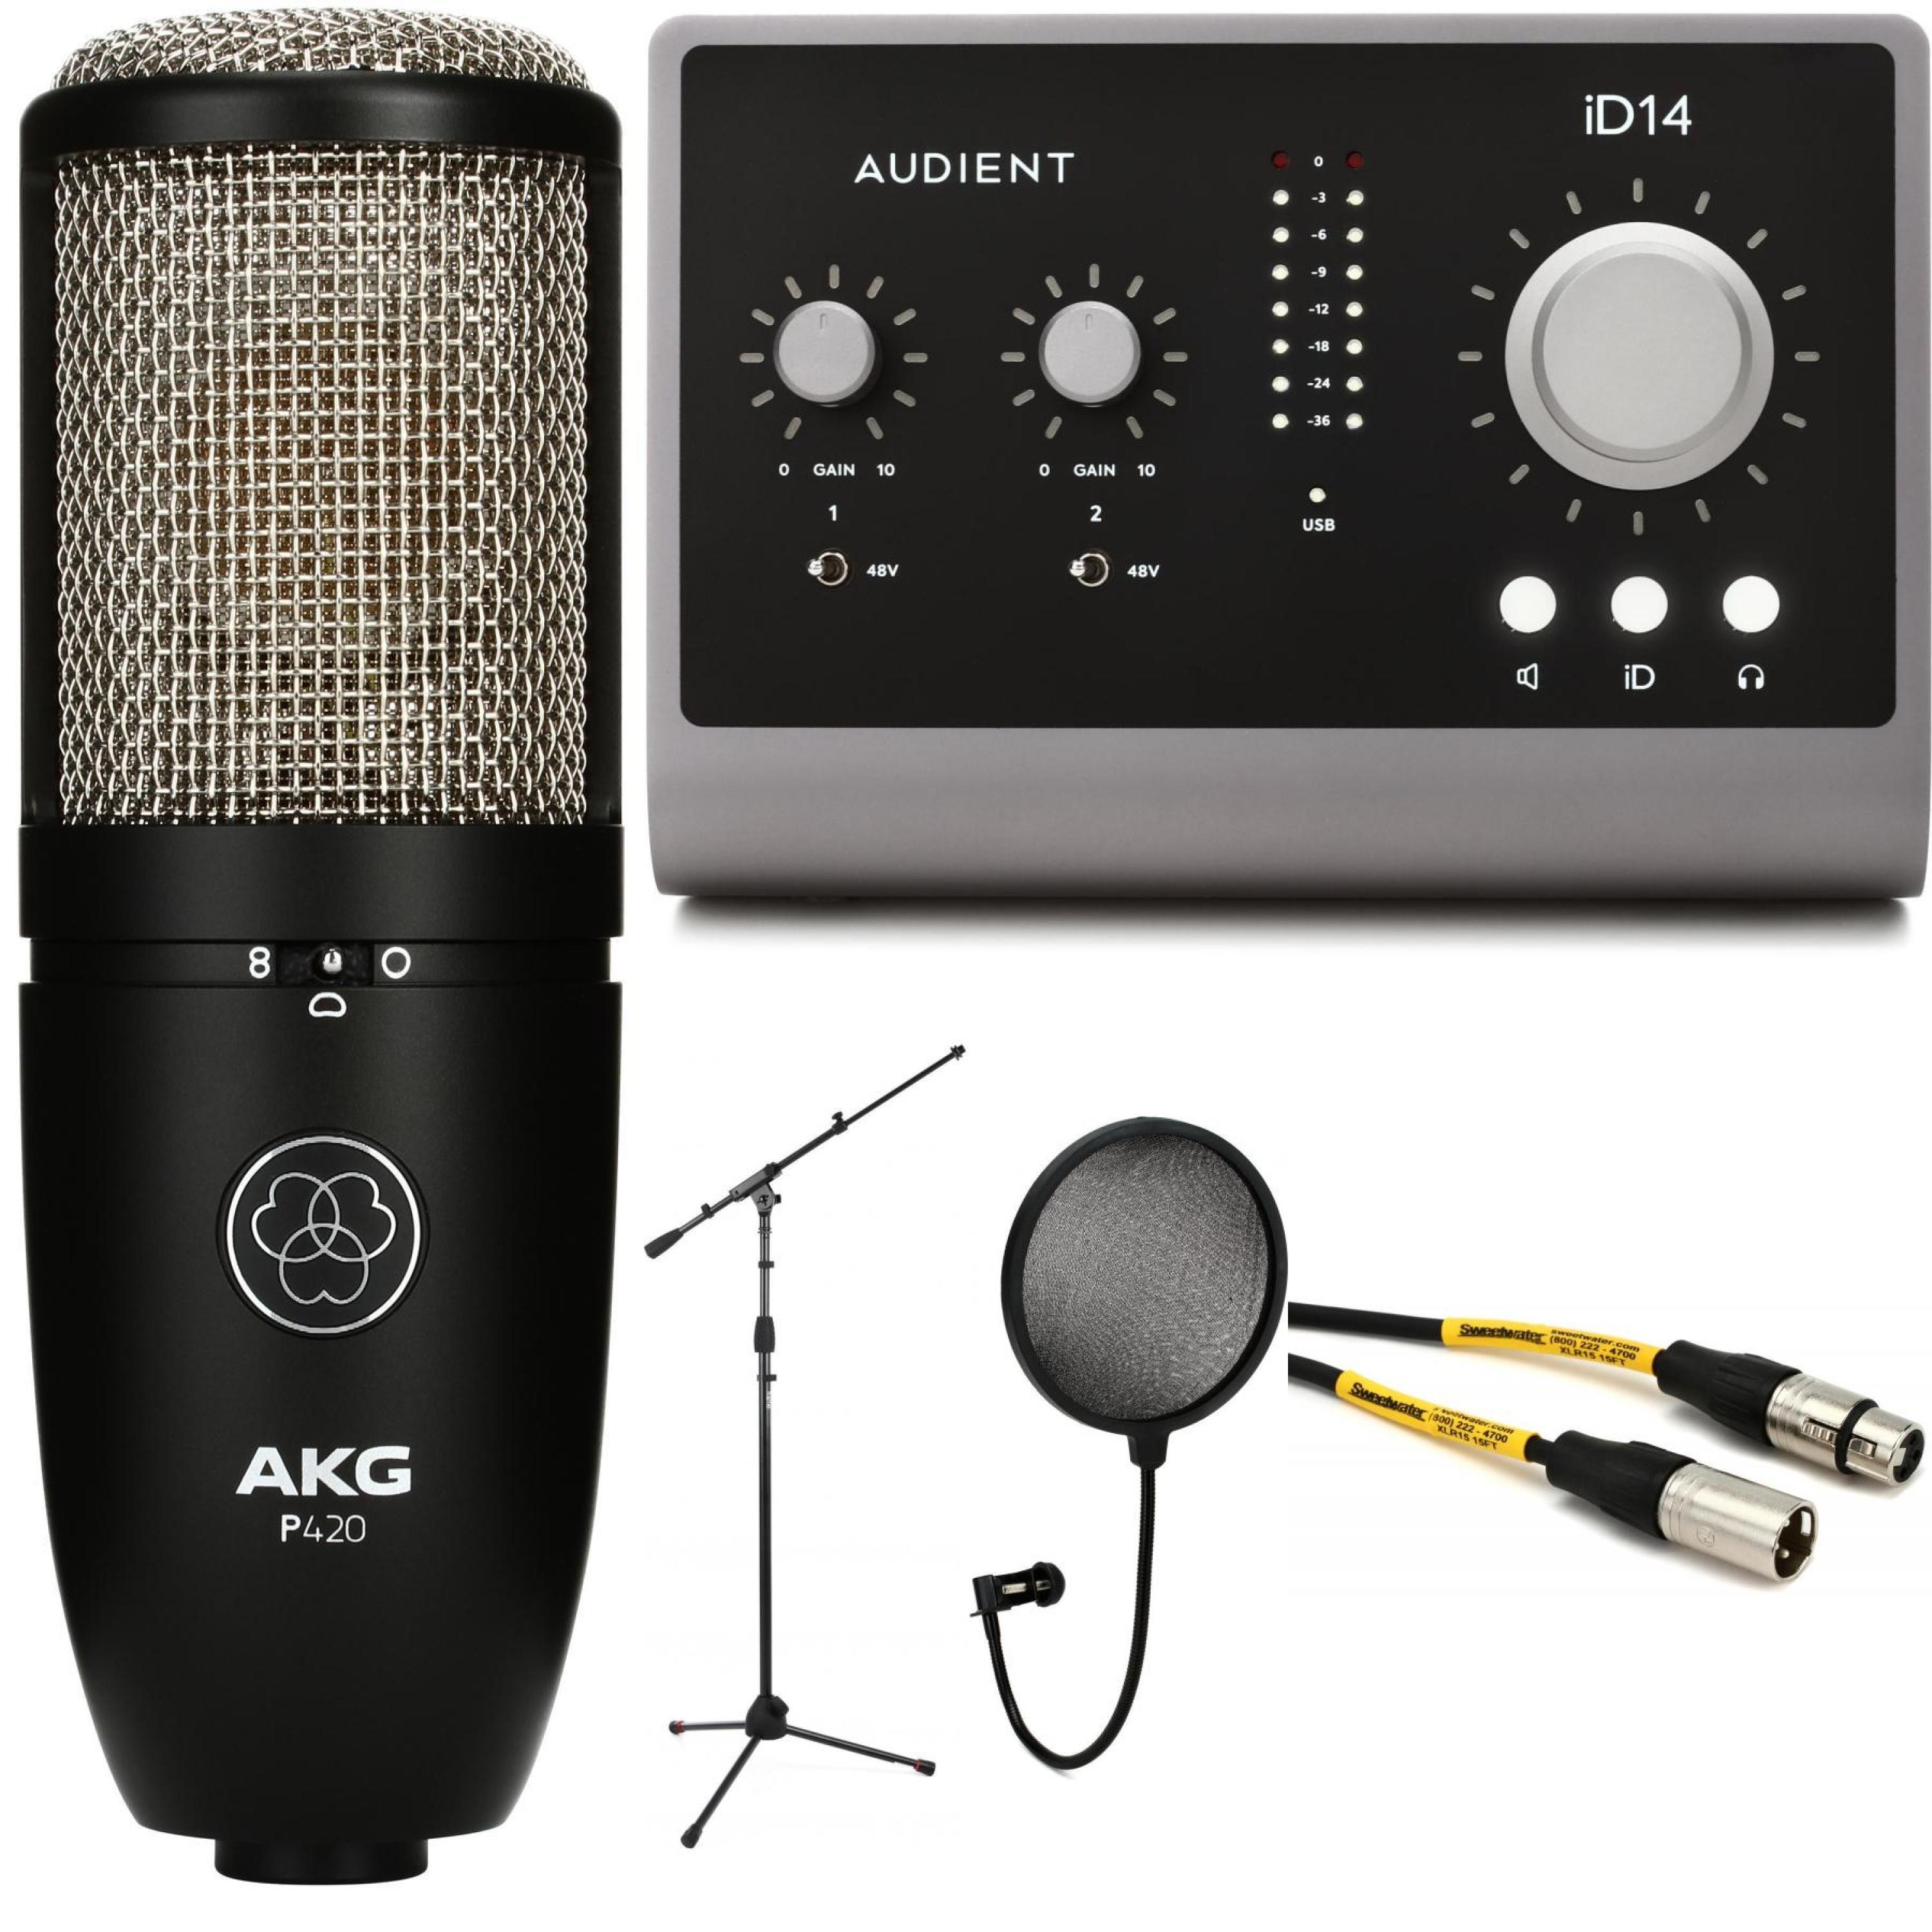 Audient ID14mk2 Audio Interface with AKG Perception 420 | Sweetwater